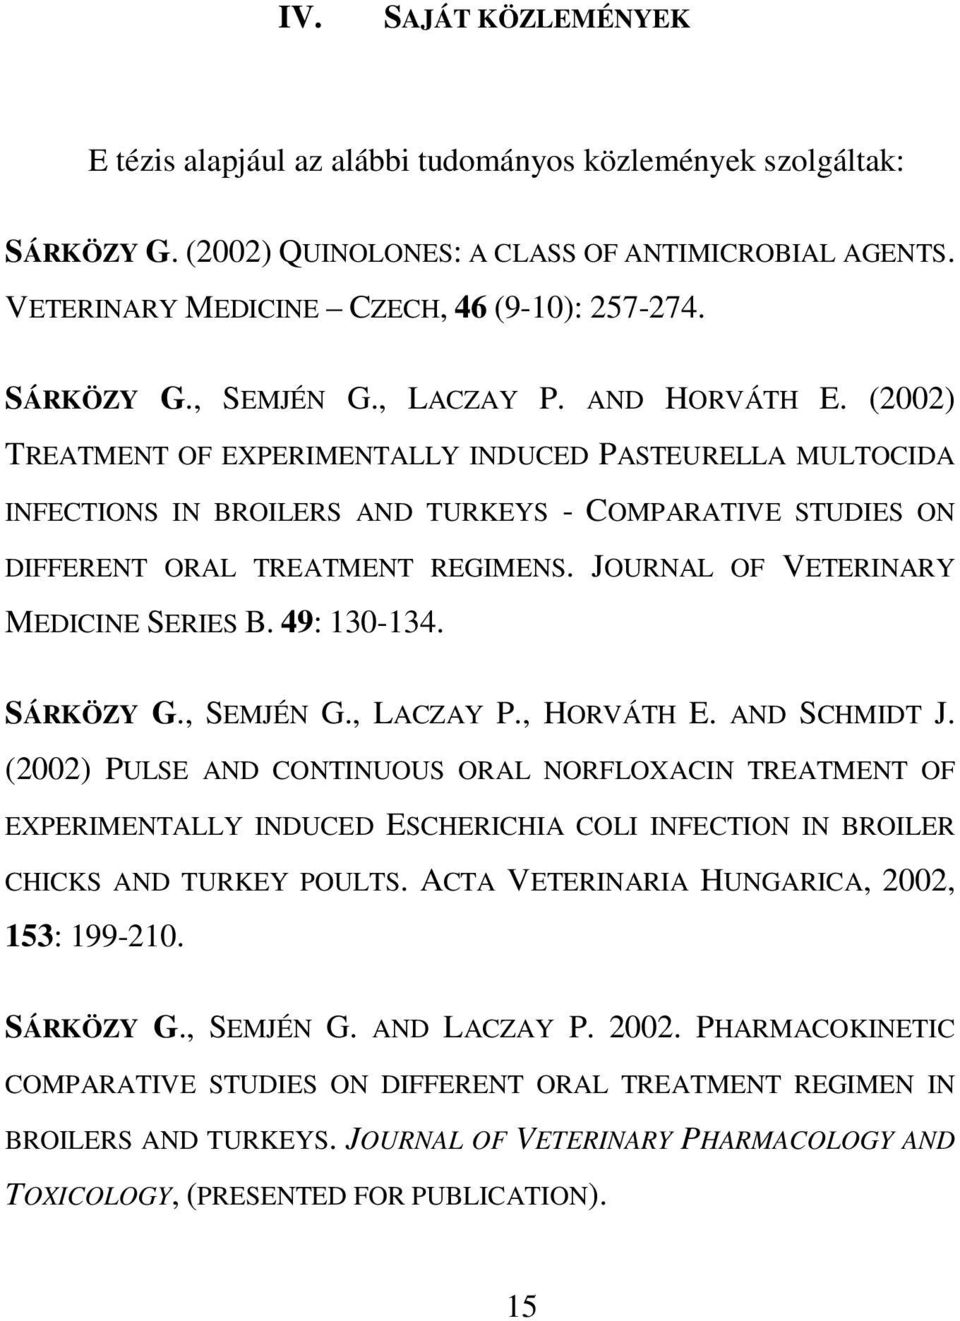 (2002) TREATMENT OF EXPERIMENTALLY INDUCED PASTEURELLA MULTOCIDA INFECTIONS IN BROILERS AND TURKEYS - COMPARATIVE STUDIES ON DIFFERENT ORAL TREATMENT REGIMENS. JOURNAL OF VETERINARY MEDICINE SERIES B.